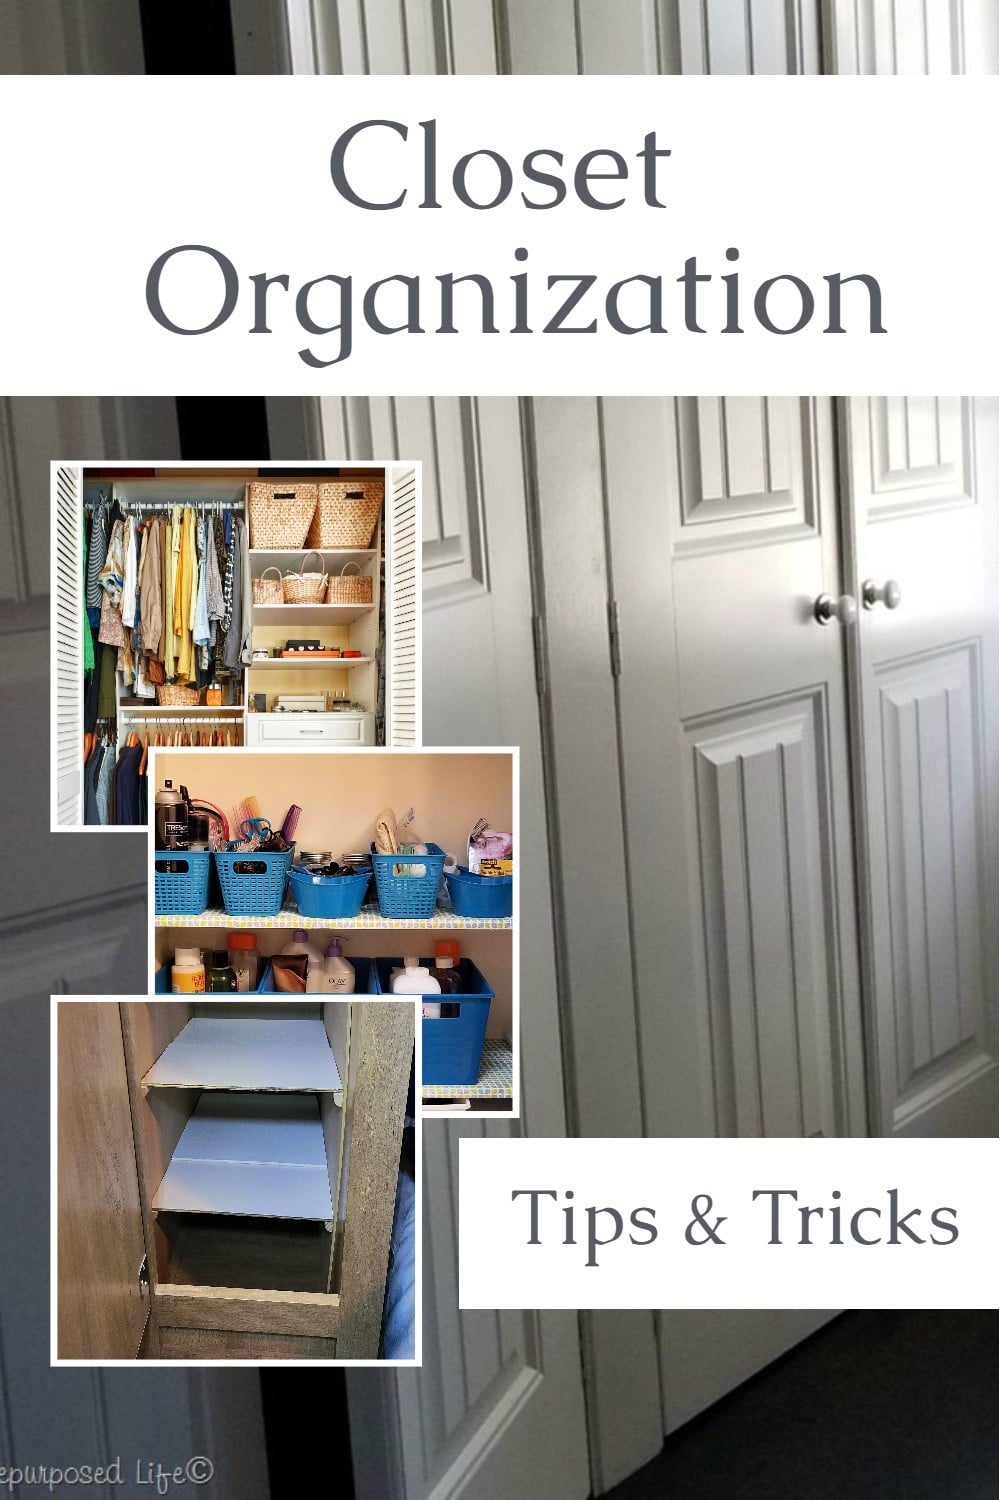 Small messy closet? These tips on closet organization will have you rethinking how you are utilizing small spaces. Tips and tricks abound. via @repurposedlife